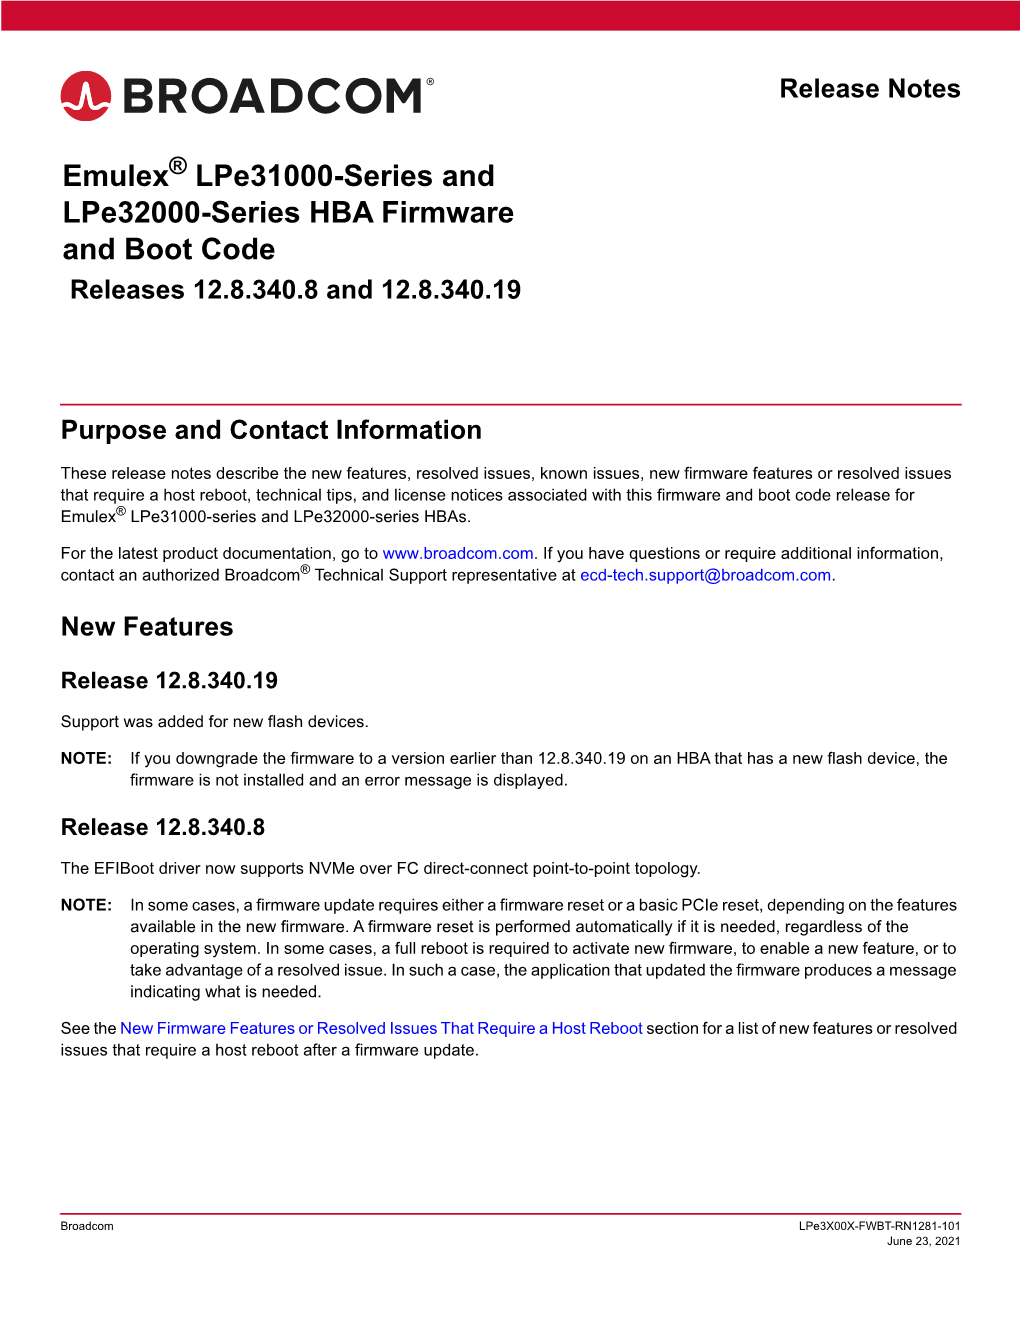 Emulex Lpe31000-Series and Lpe32000-Series HBA Firmware and Boot Code Release Notes Releases 12.8.340.8 and 12.8.340.19 Resolved Issues